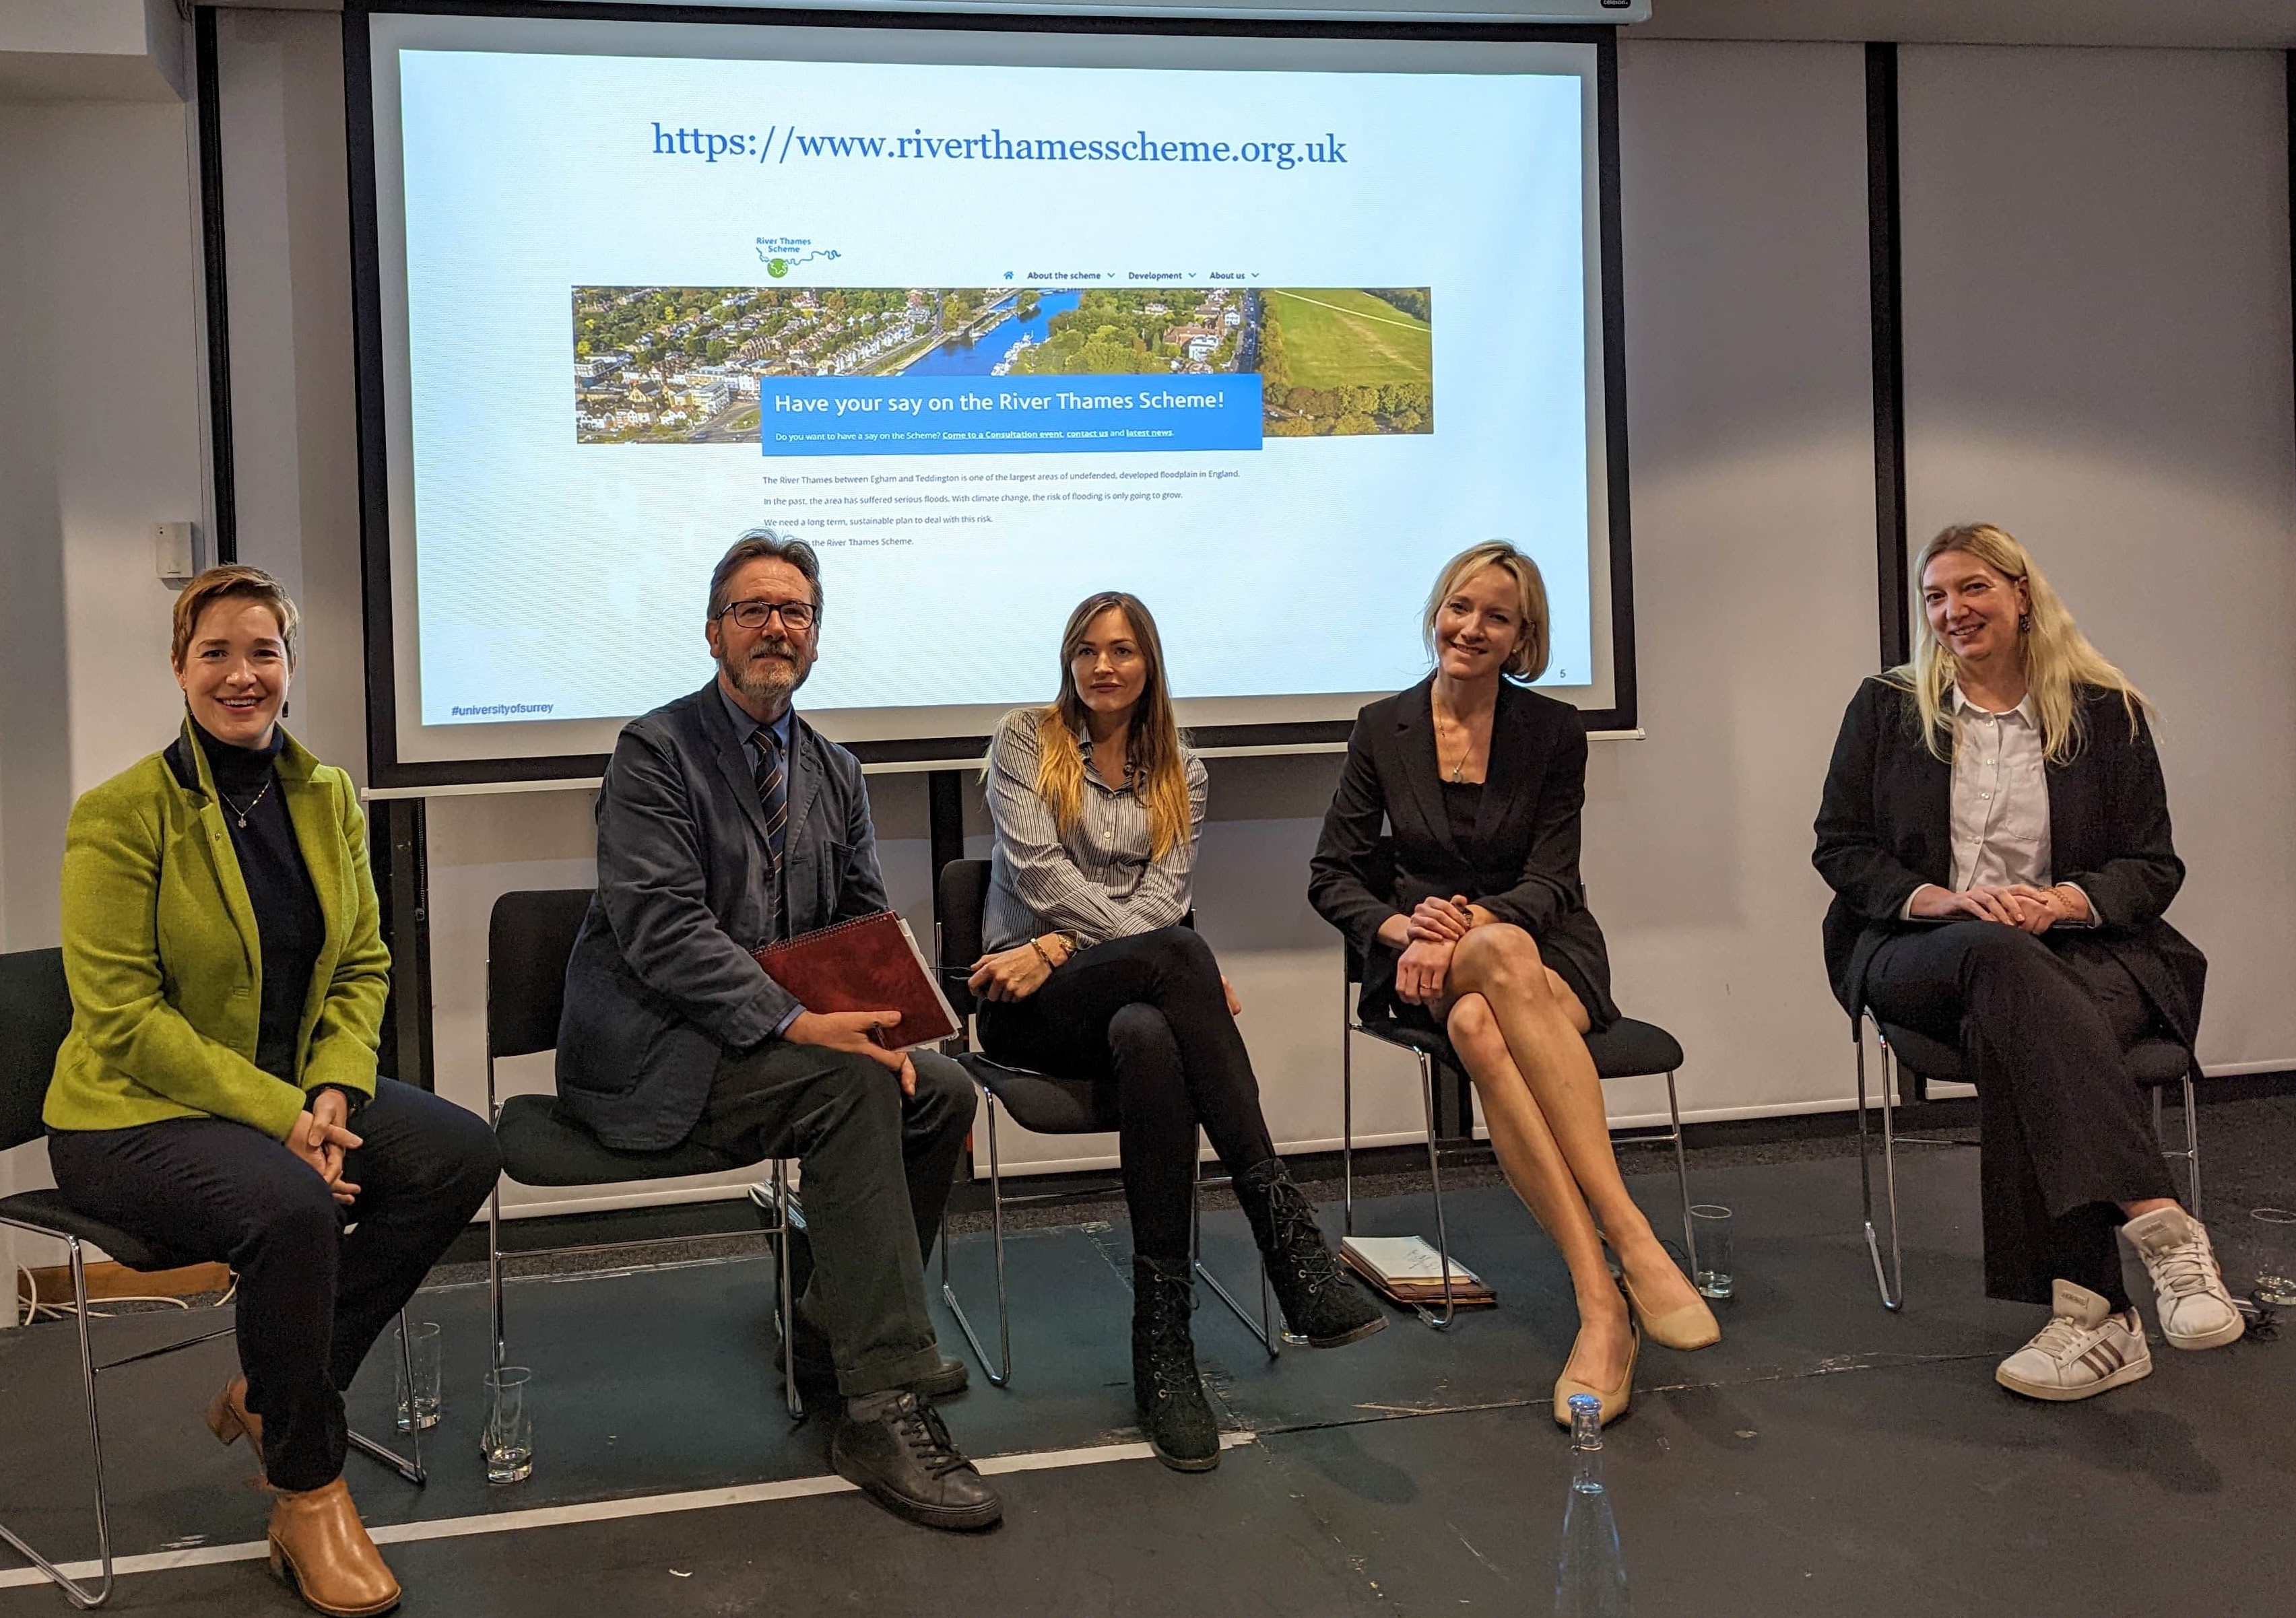 The five panellists, from left to right, Panel Chair, Professor Amelia Hadfield (University of Surrey), Ian Christie (Centre for Environment and Sustainability), Councillor Marissa Heath (Surrey County Council), Katie Stewart (Surrey County Council), and Jeanne Capey (Environment Agency).